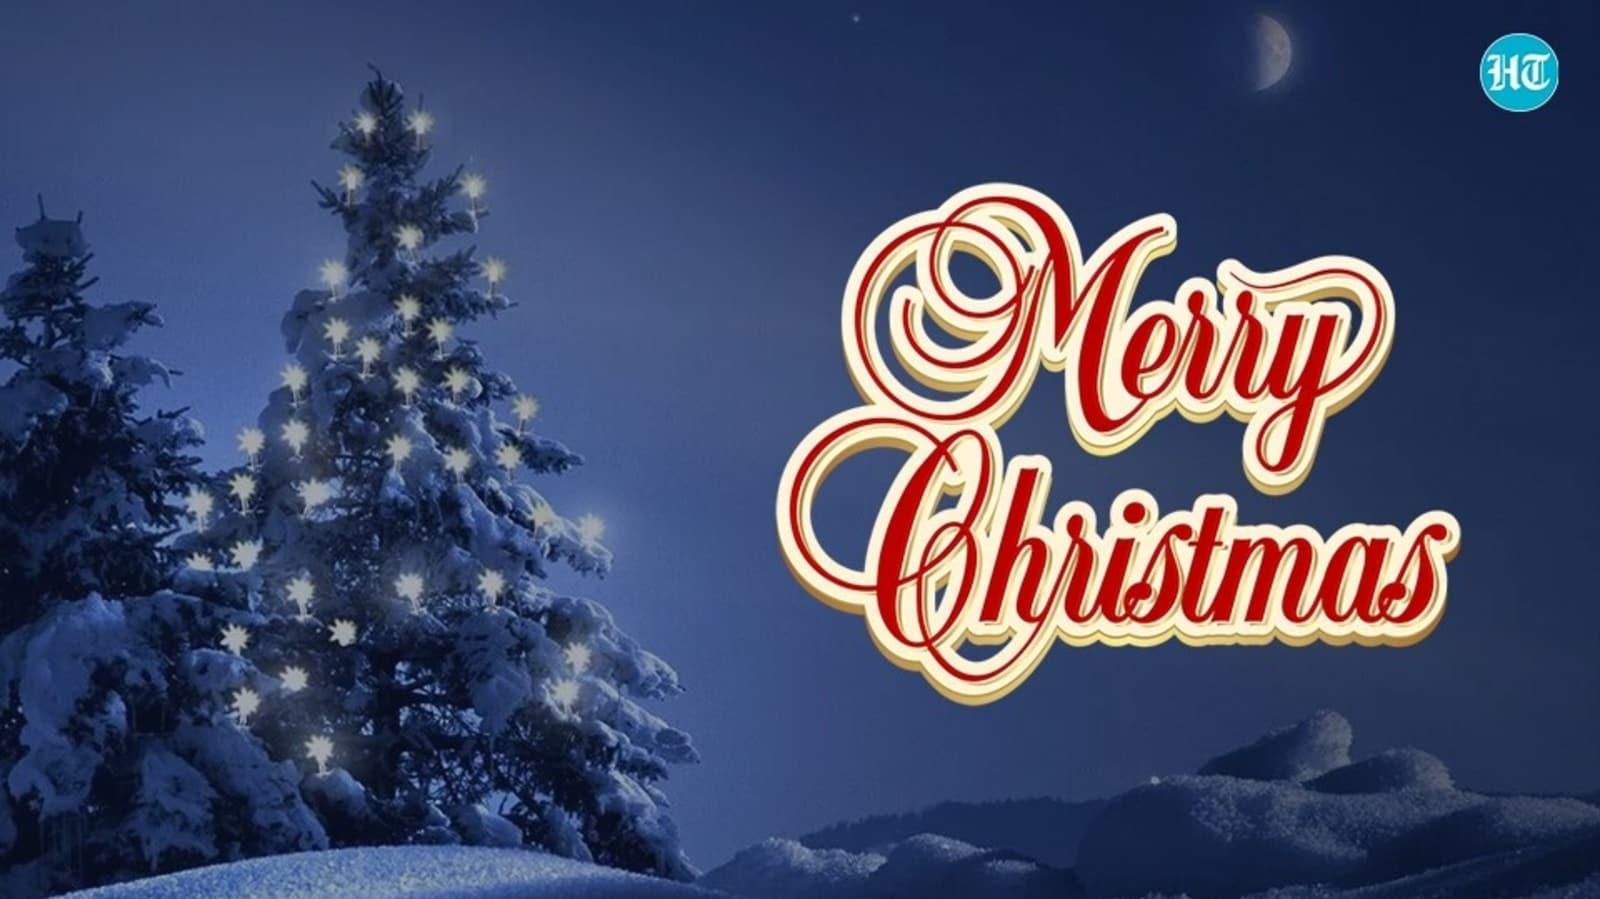 Merry Christmas Best wishes images and messages to share